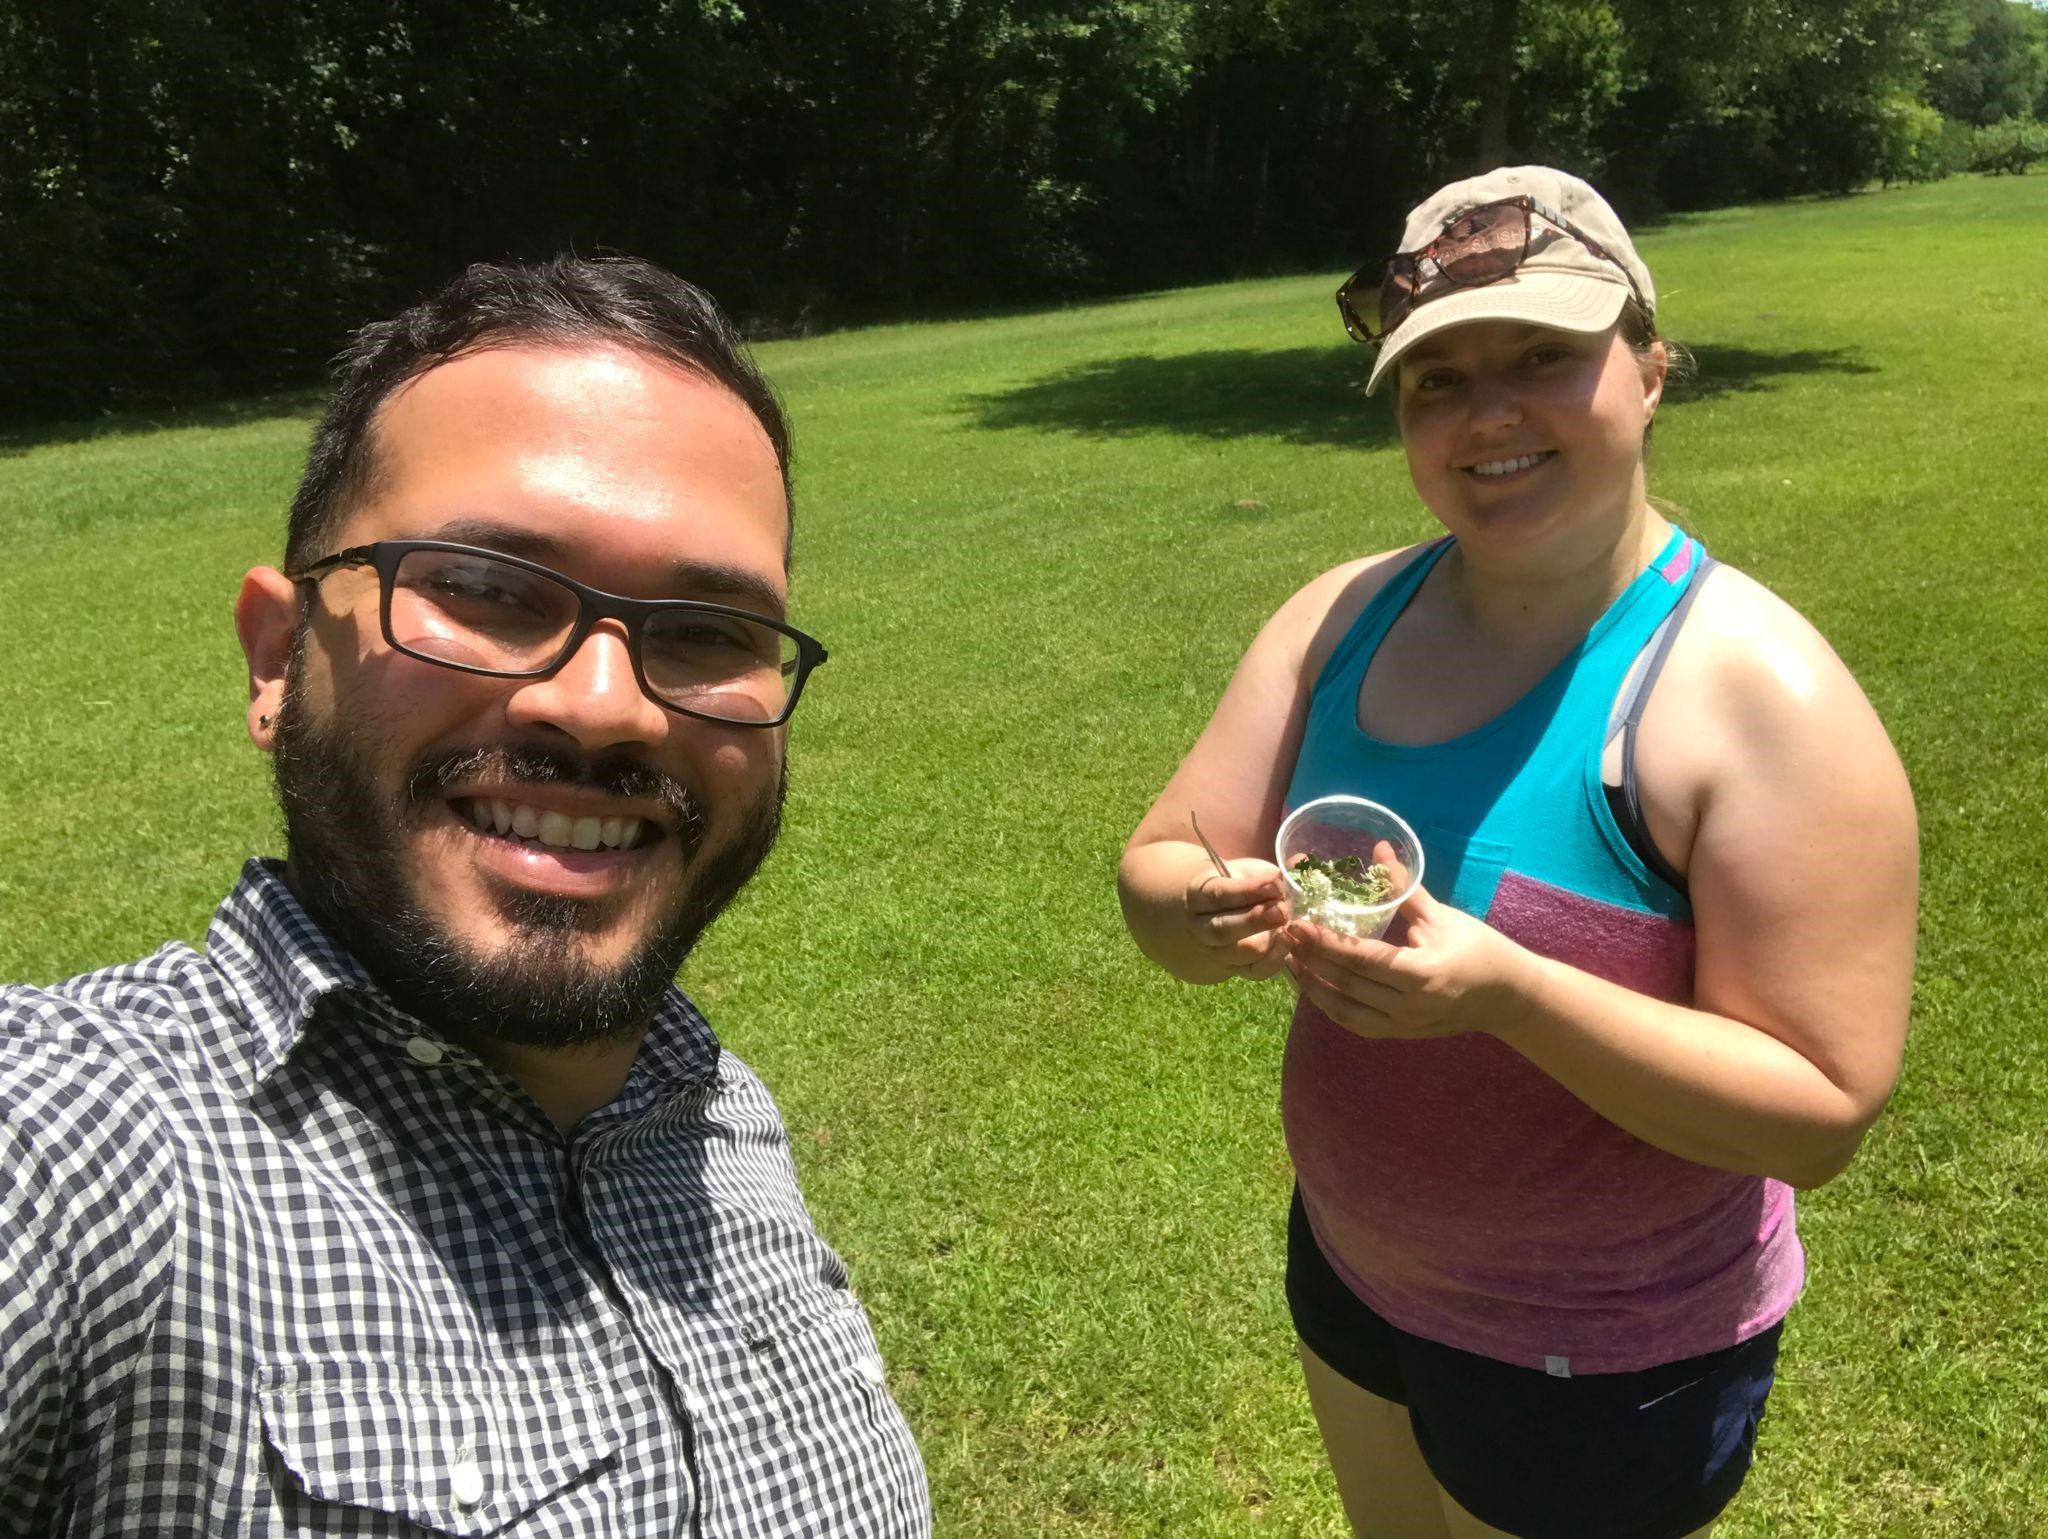 Luis Y. Santiago-Rosario (left) and Katherine Hovanes (right) collecting white clover (Trifolium repens) in Highland Road, Baton Rouge during the summer of 2018. Luis and Katherine worked together under the guidance of Dr. Kyle Harms.